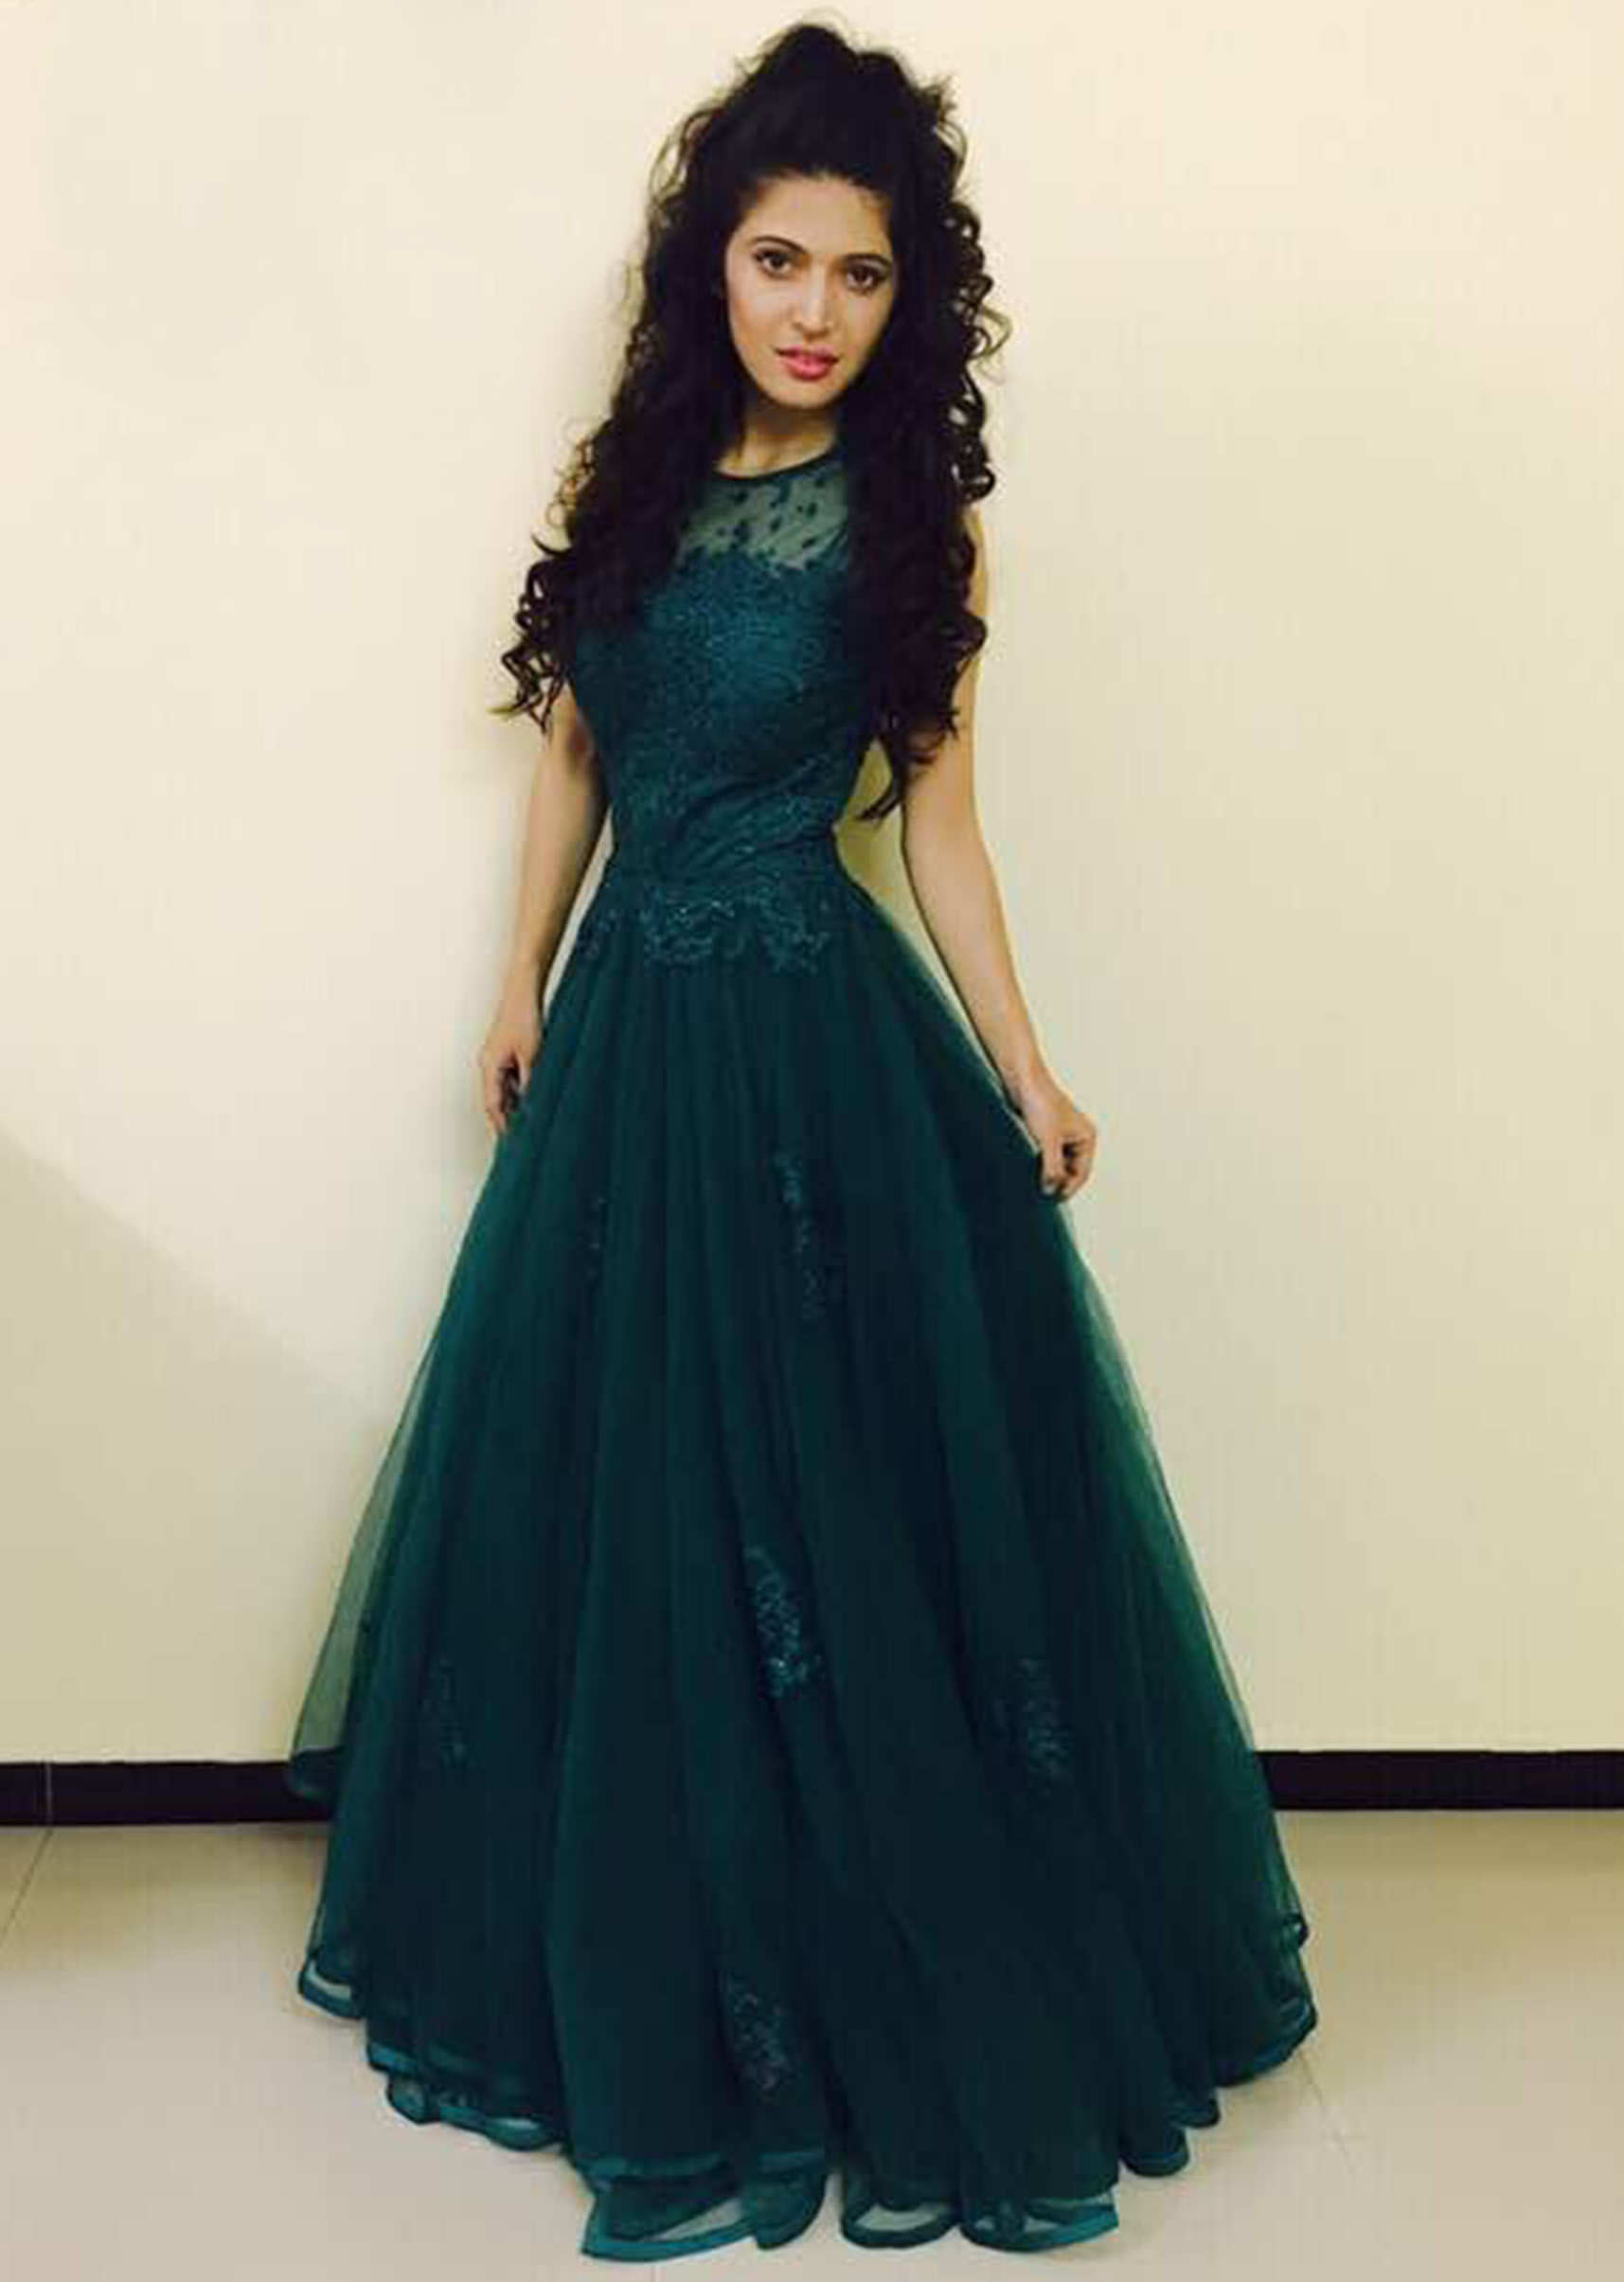 Charlie Chauhan In Kalki Teal Blue Net Gown Studded With Stones Online - Kalki Fashion